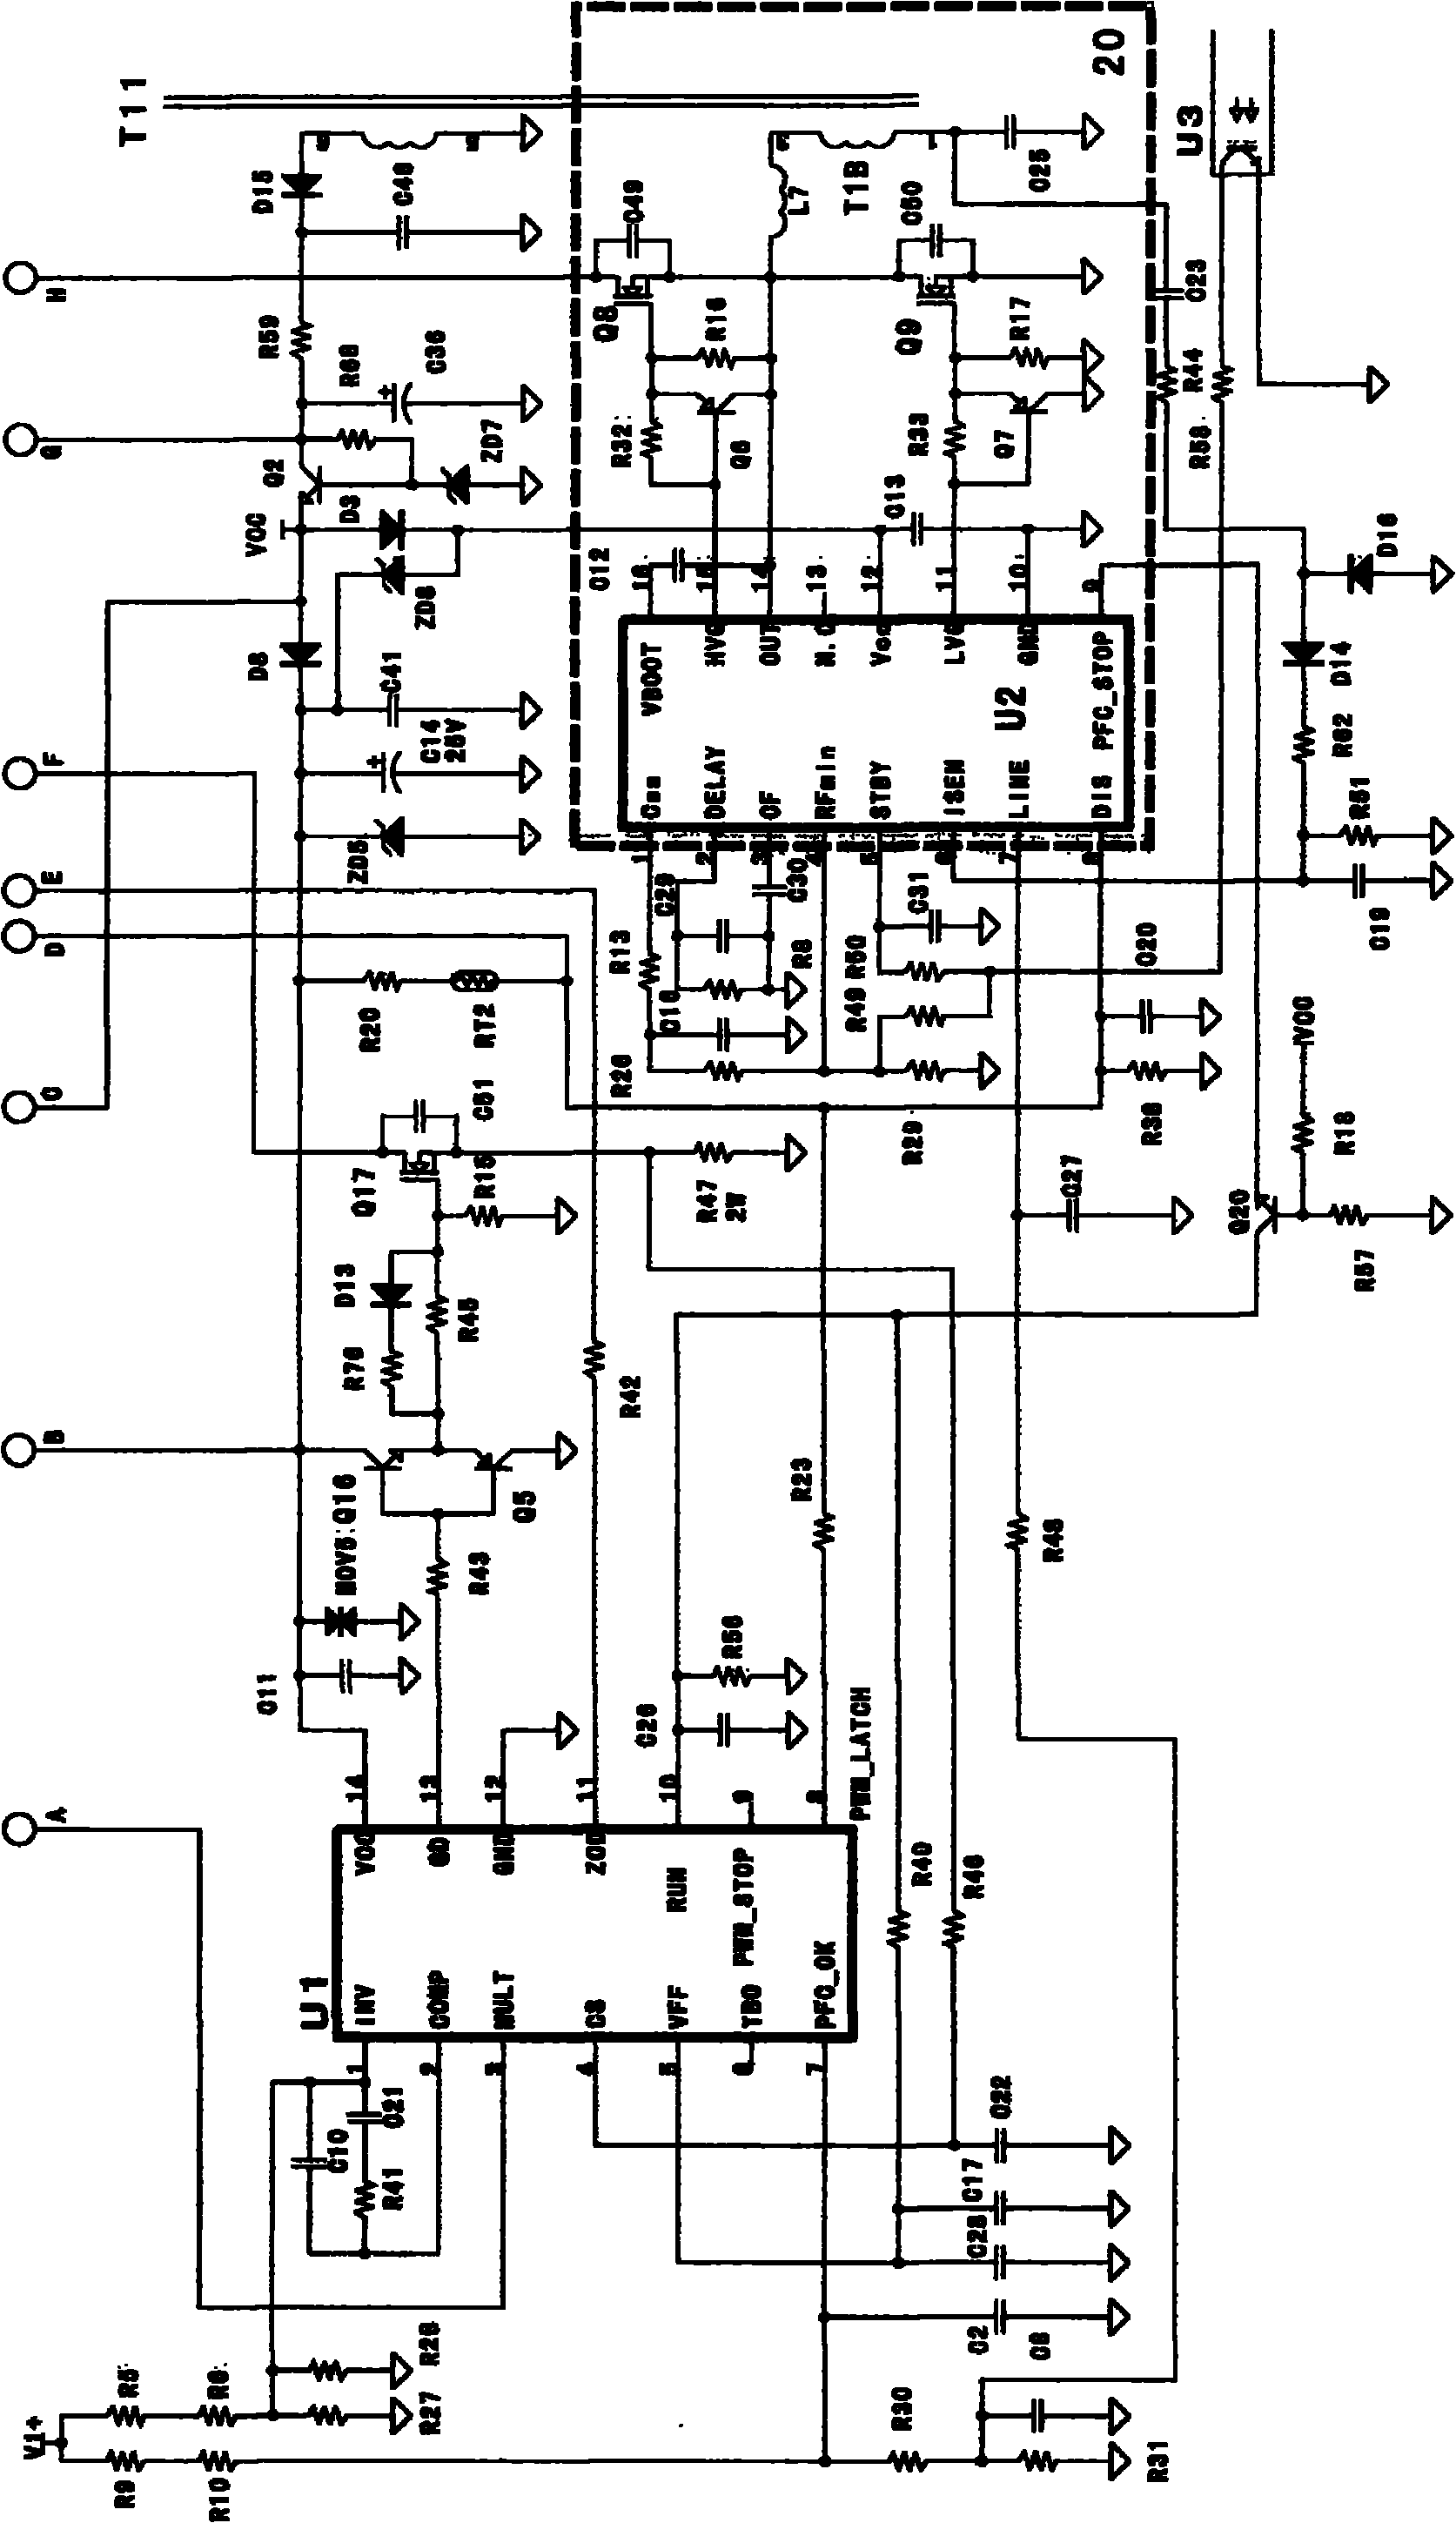 Large-power intelligent dimming multiple-output power supply for suppressing electric surge with field-effect transistor